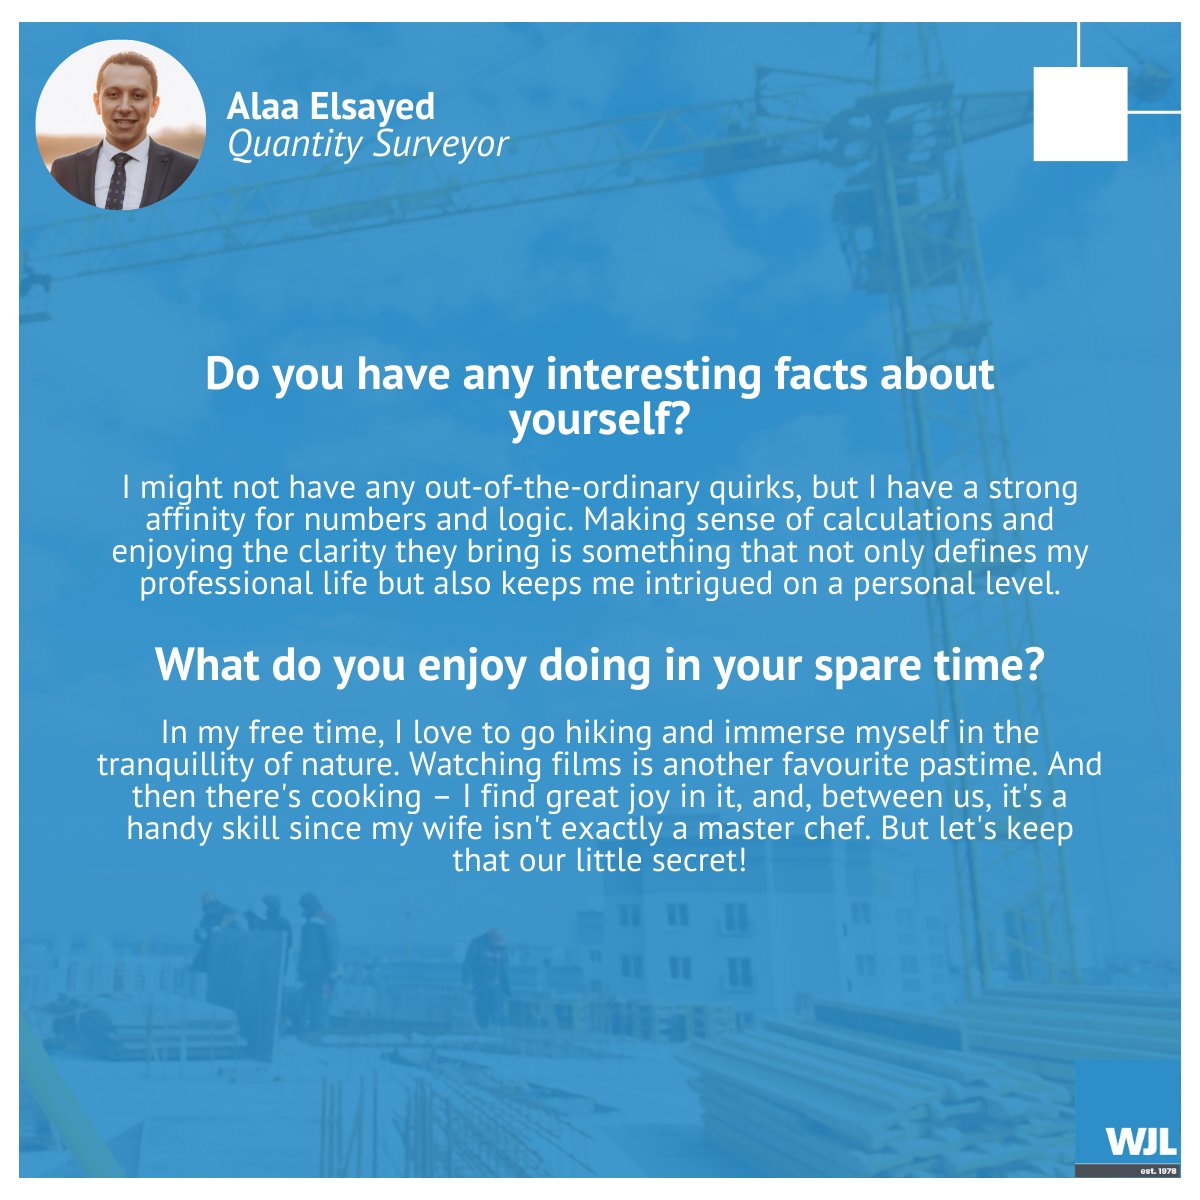 Please welcome our new Quantity Surveyor, Alaa Elsayed! 👋

With his BSc in Civil Engineering and his recent MSc in Quantity Surveying and Commercial Management, we are certain that Alaa will excel in his new role.

#QuantitySurveyor #MeetTheTeam